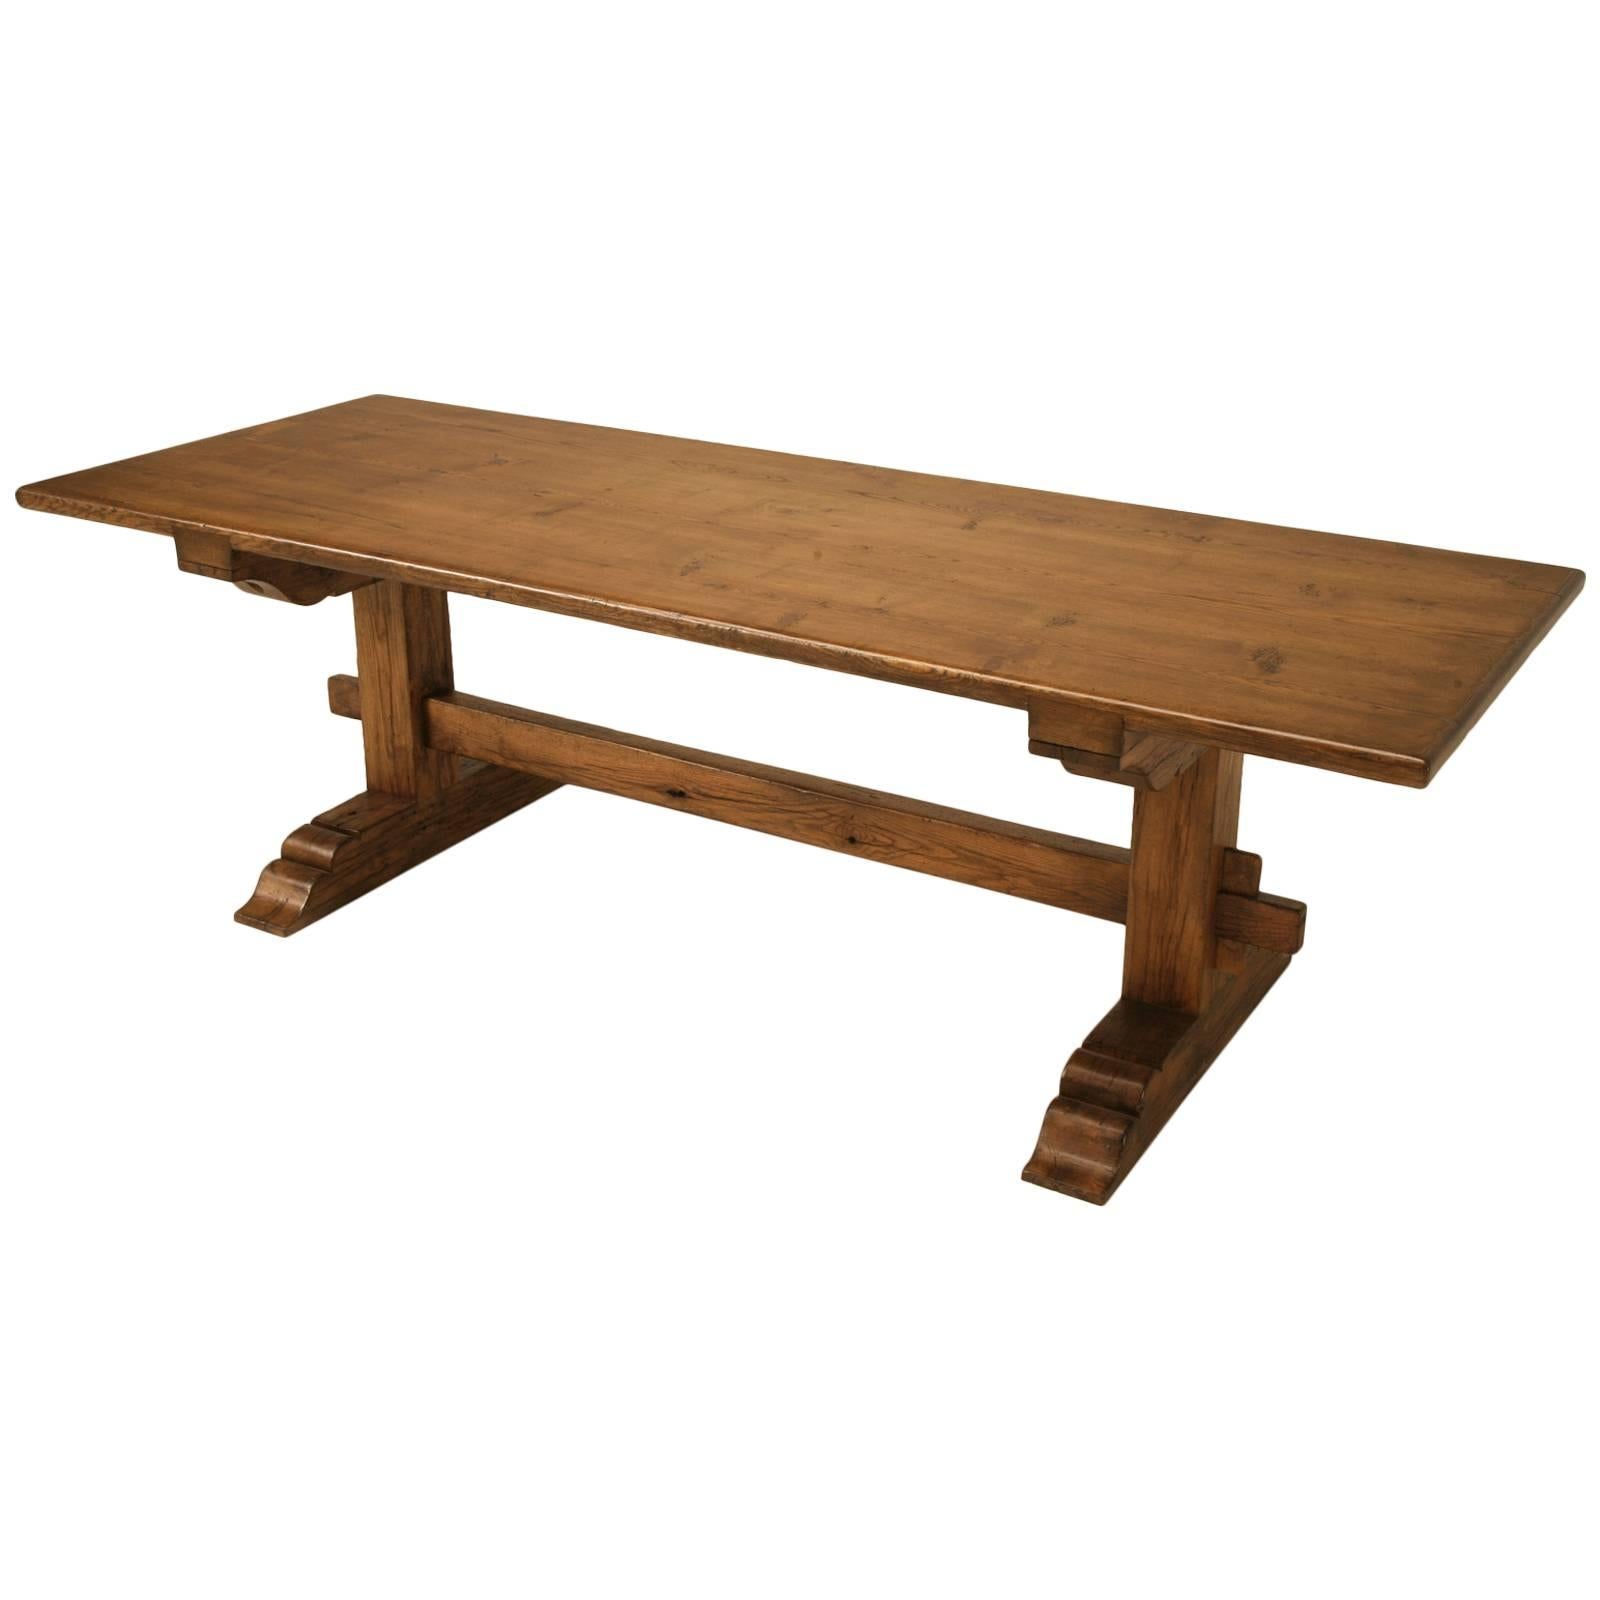 Authentic Italian Style Farm Table Made from Reclaimed Lumber Available Any Size For Sale